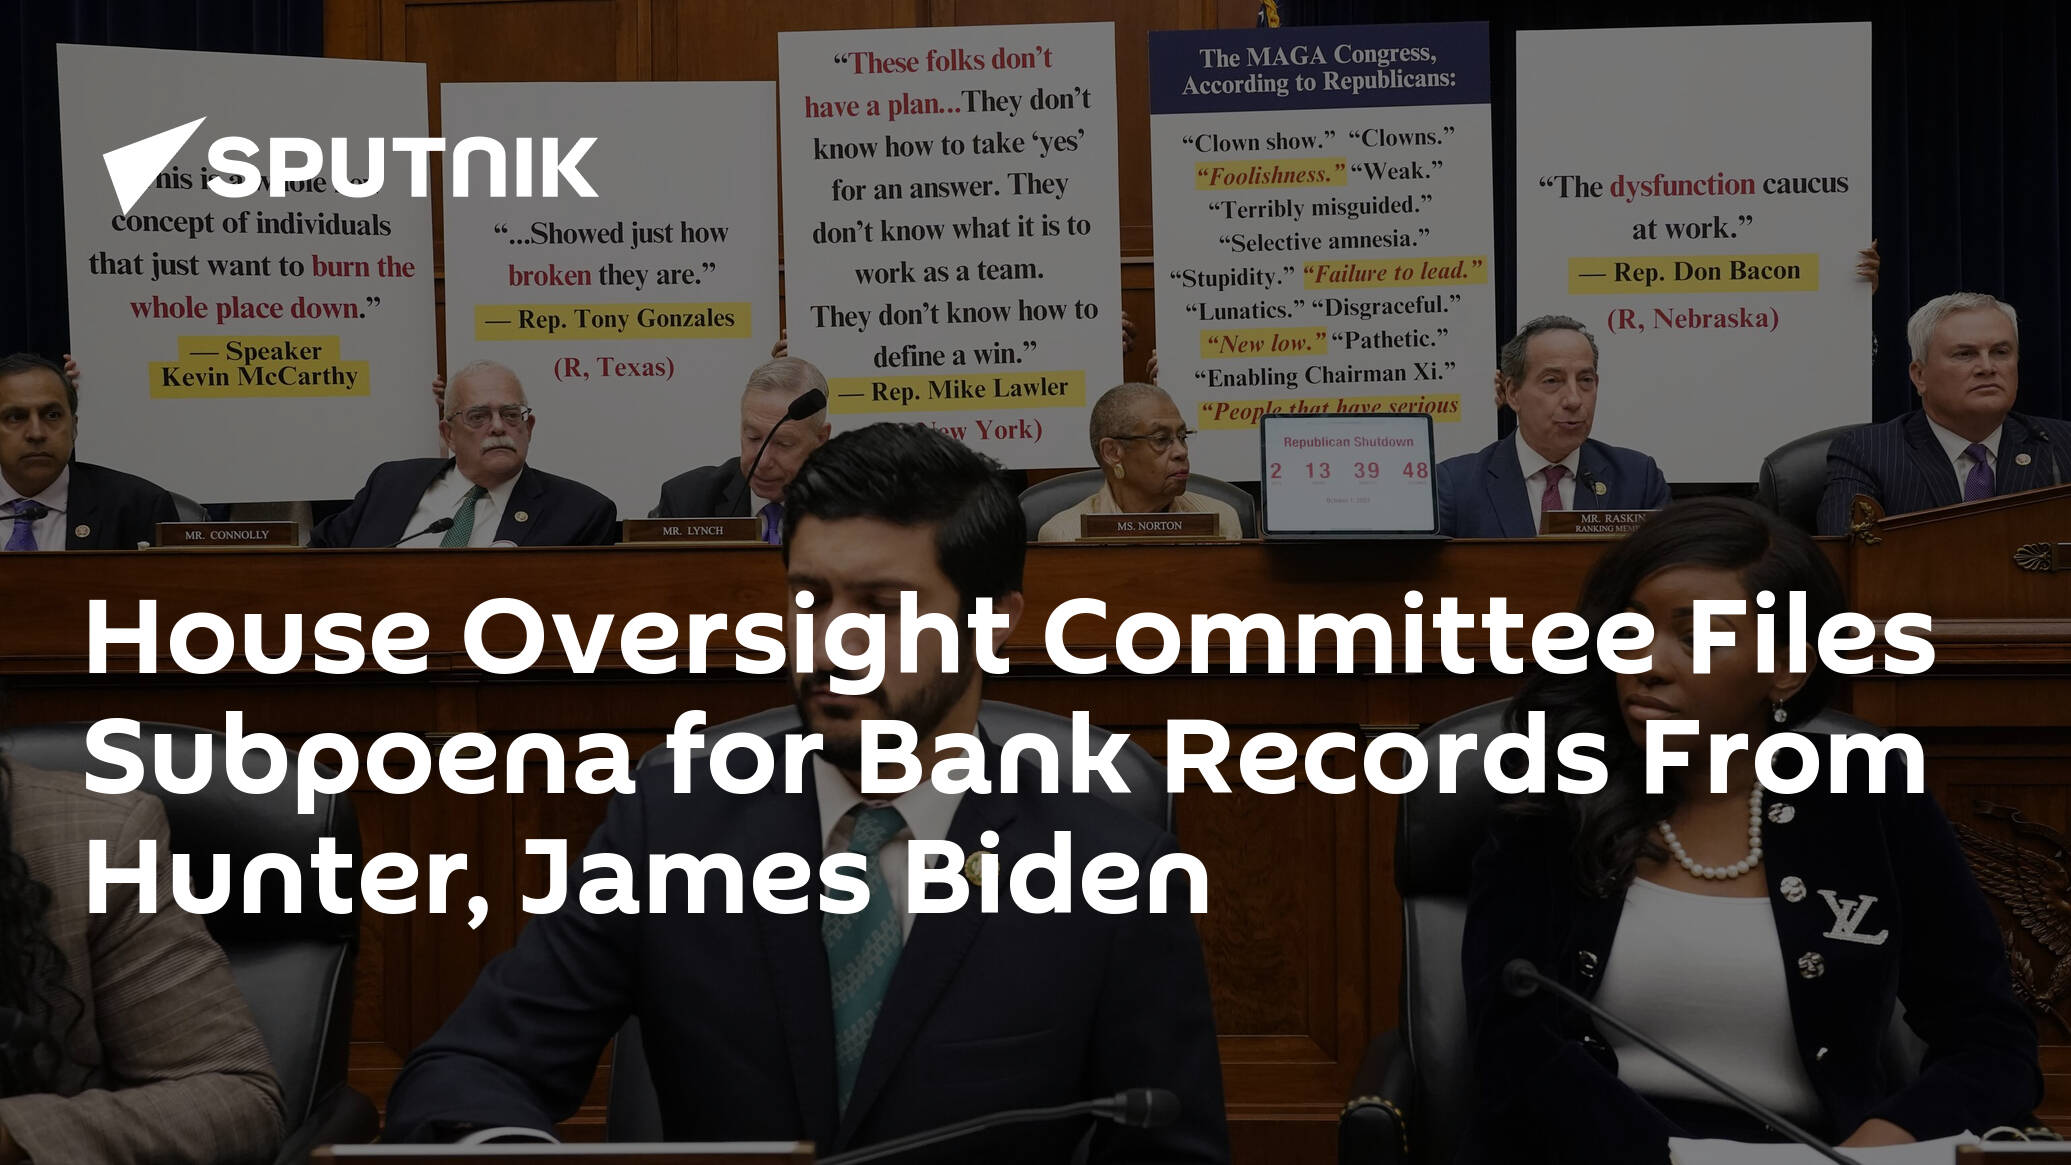 House Oversight Committee Files Subpoena for Bank Records From Hunter, James Biden